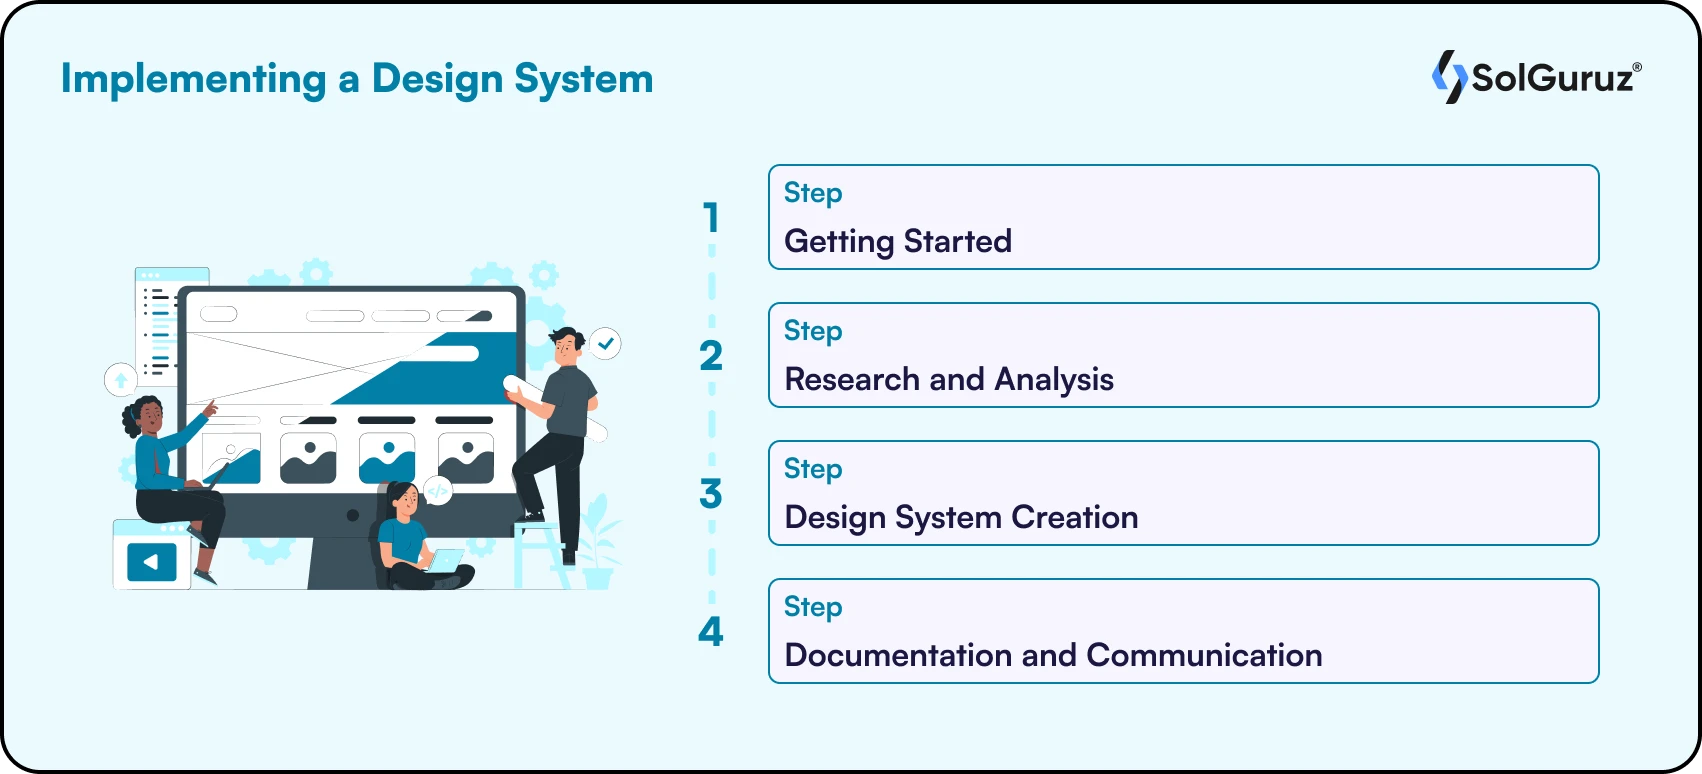 Steps to implement a Design System